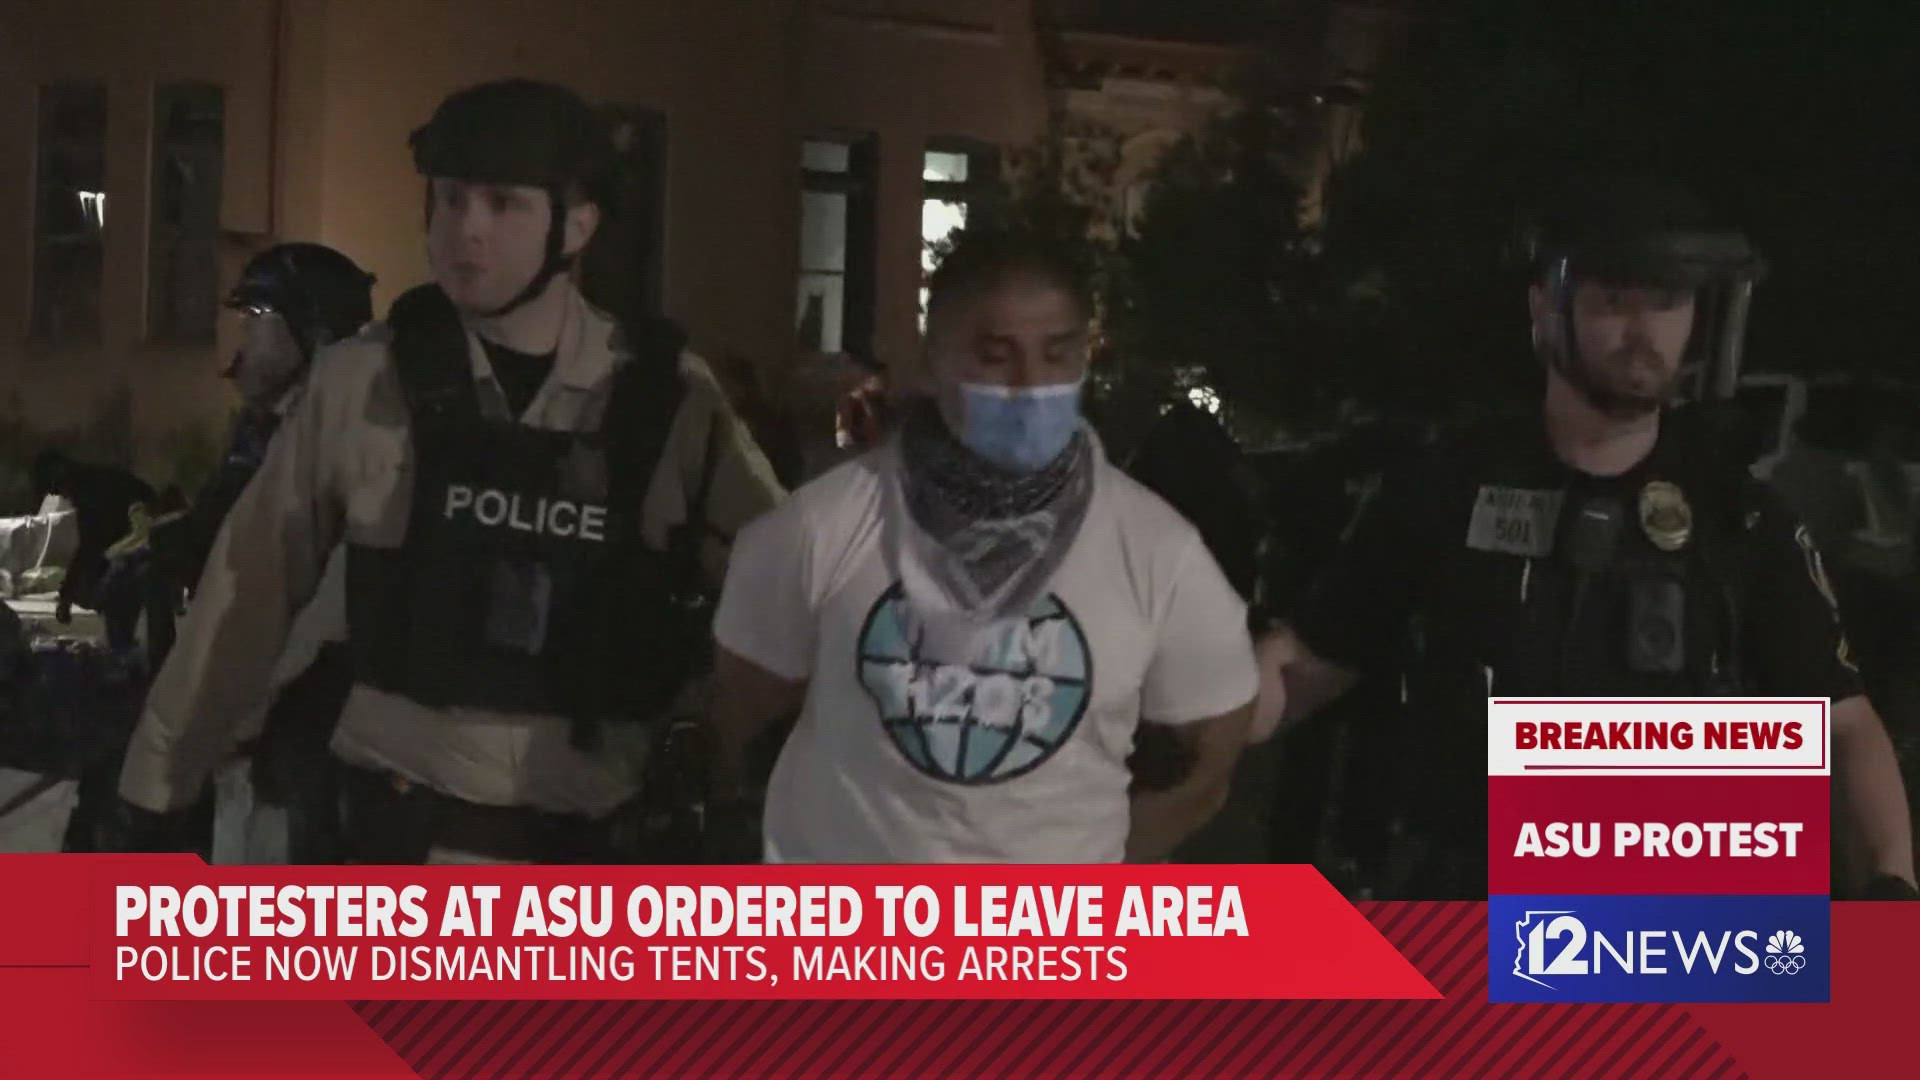 14 hours after the protest began, police broke up the protest outside of Old Main on ASU's Tempe campus. Here is a recap of what happened.